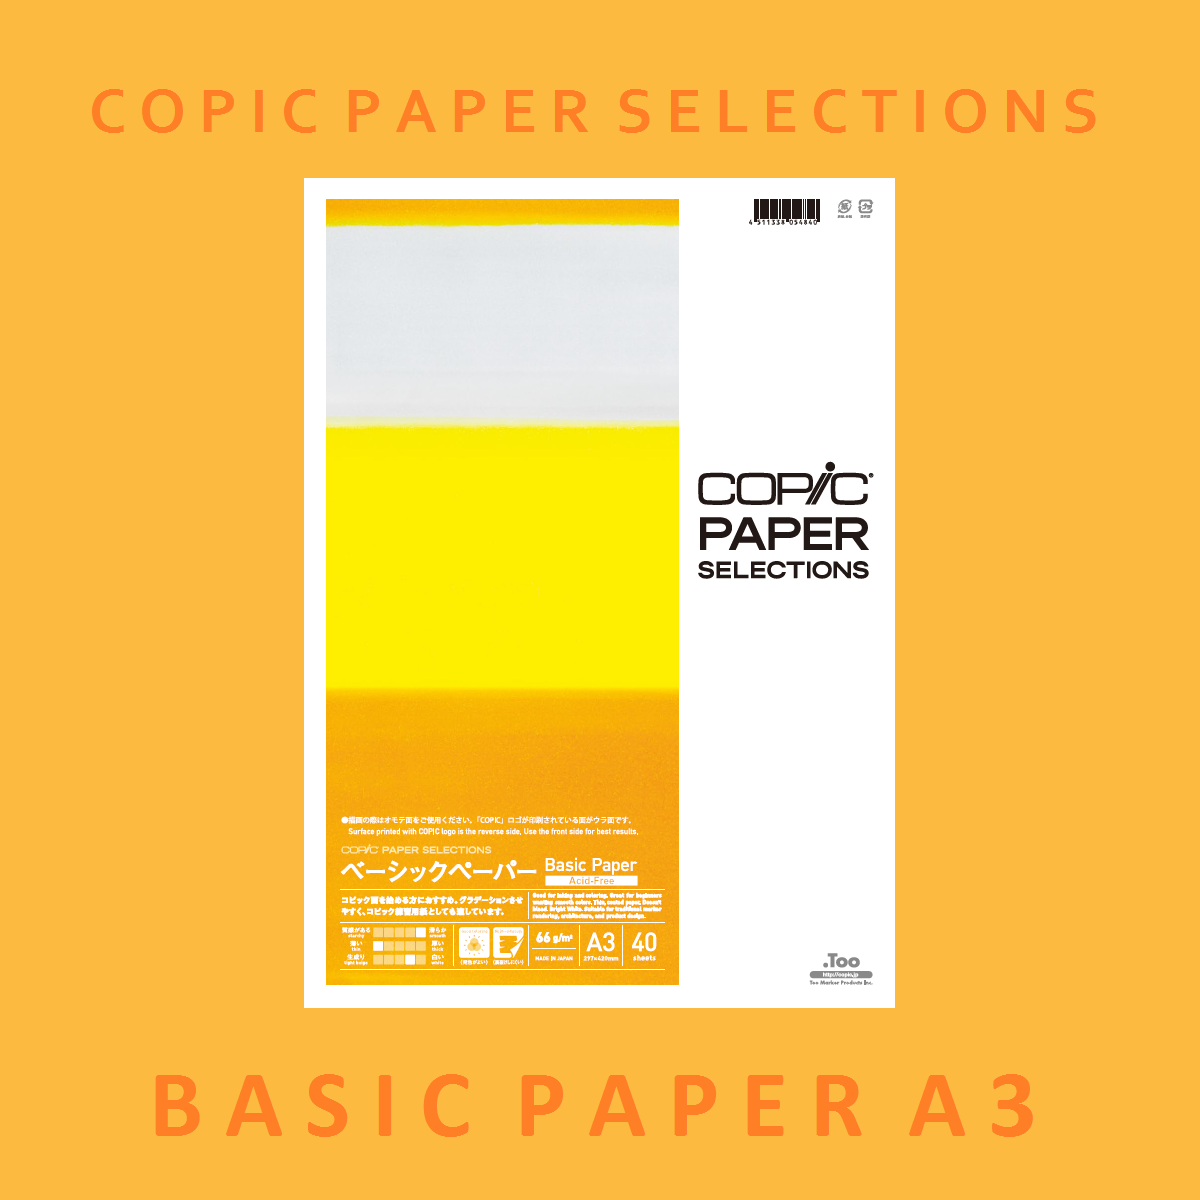 Basic Paper: A3 SIZE NOW ON SALE - COPIC Official Website